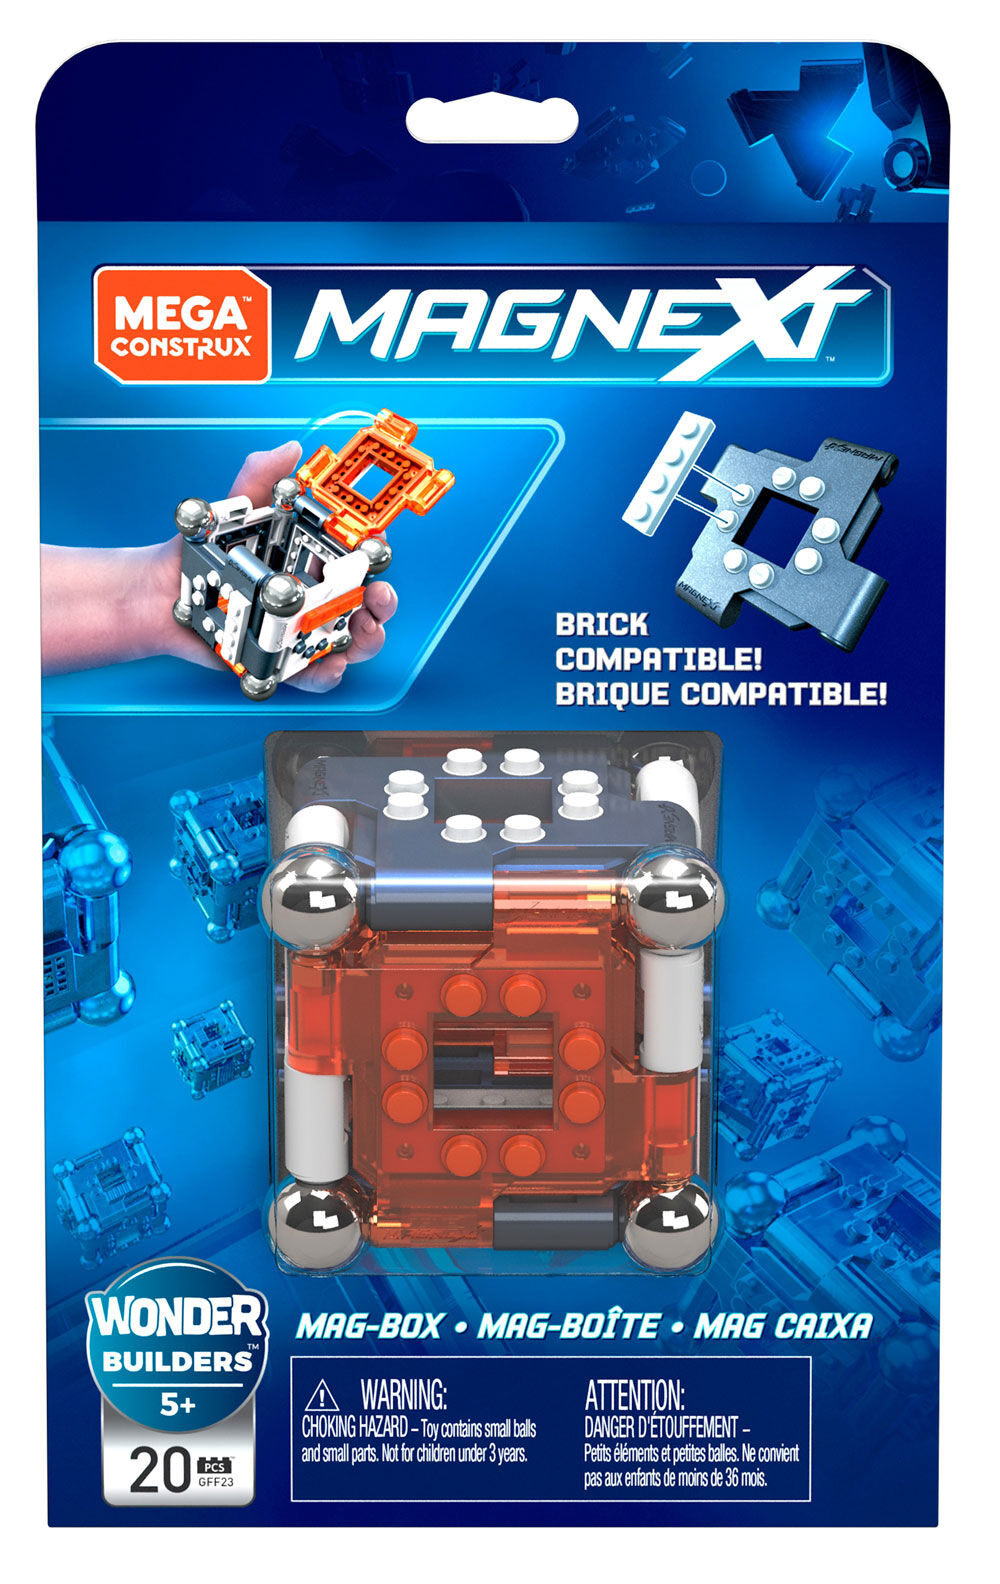 magnext toys